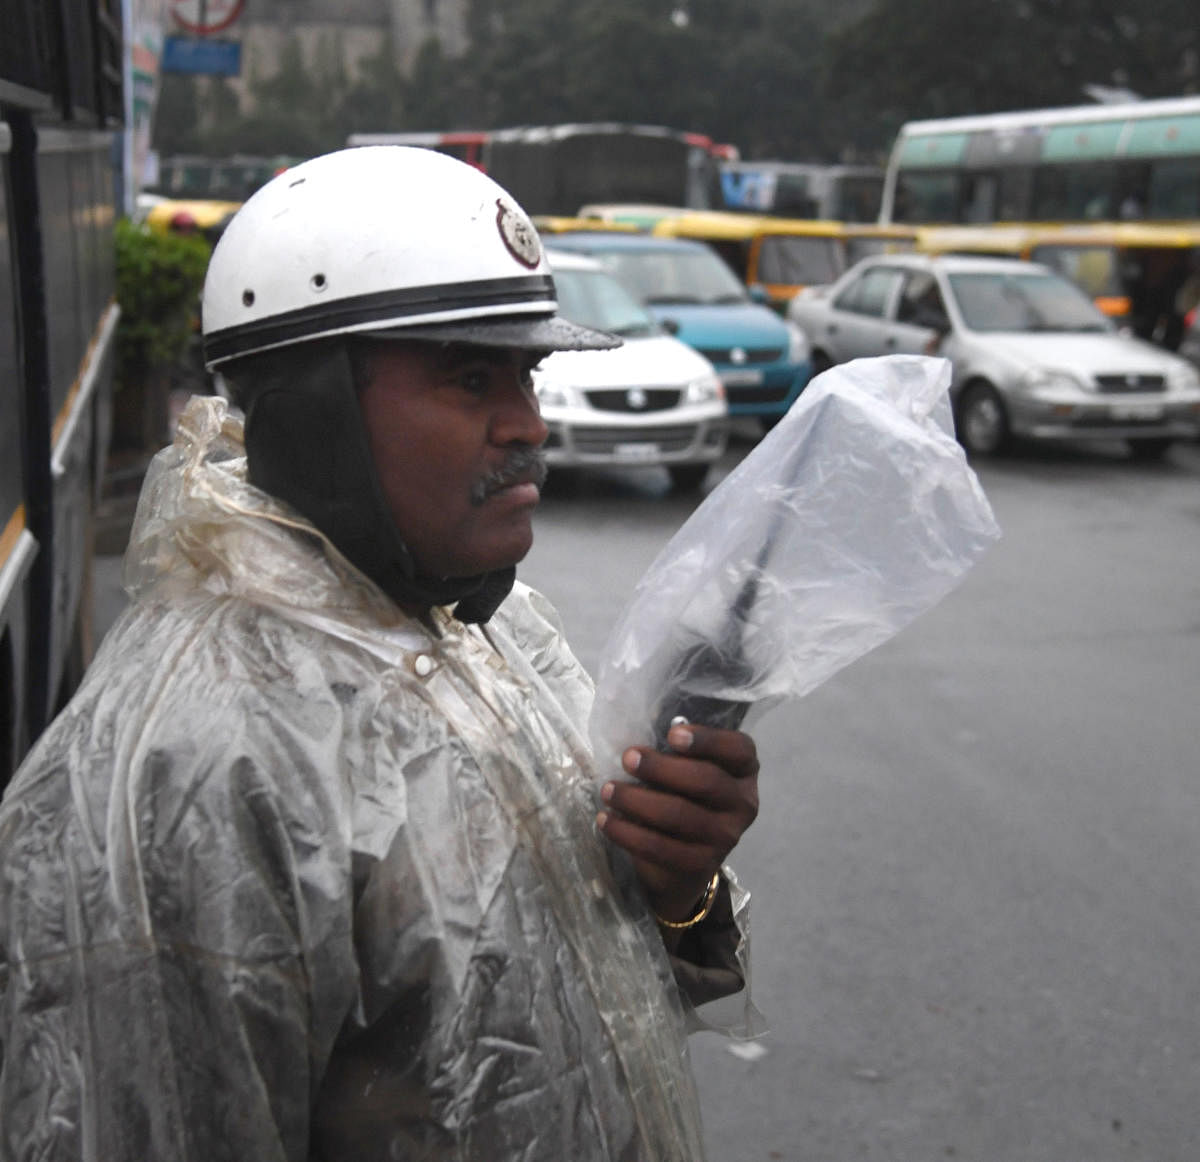 In Bengaluru, a number of traffic personnel have reported respiratory problems.